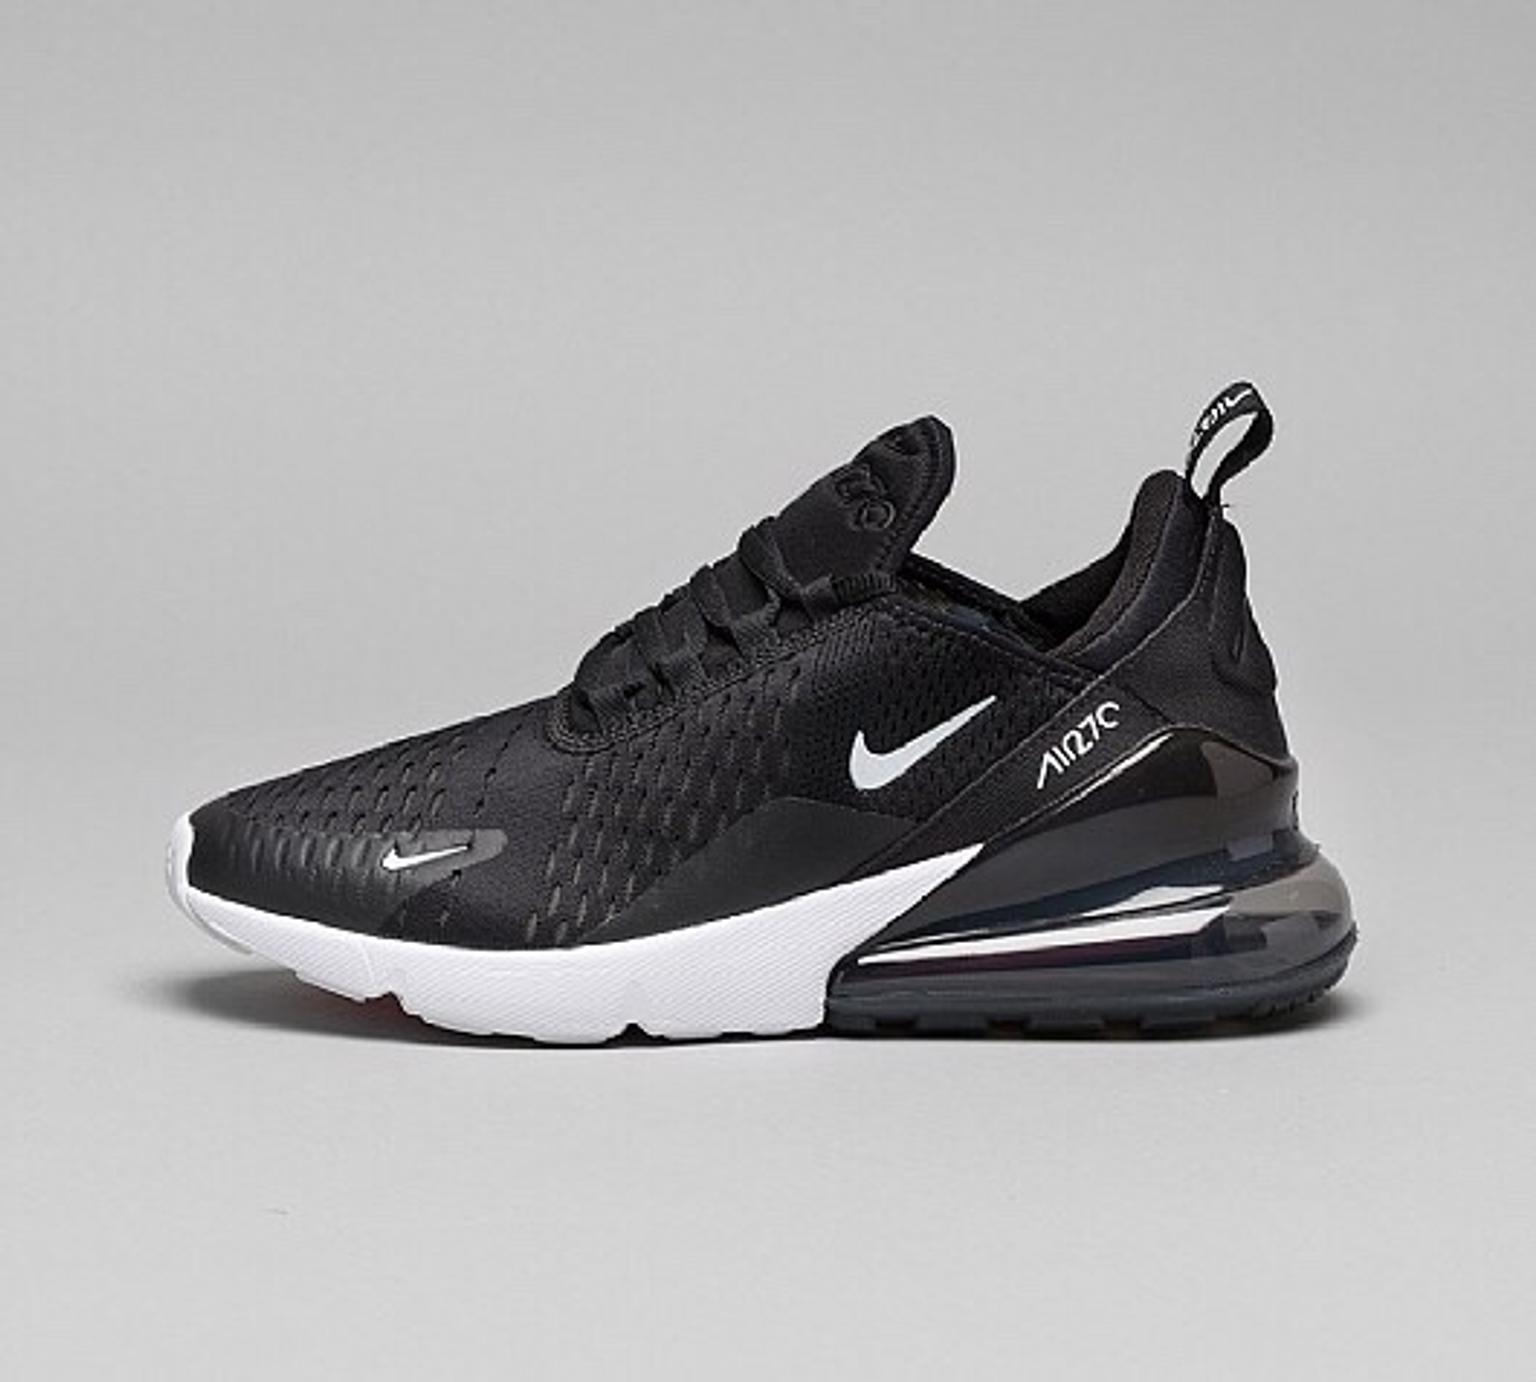 schwarz nike 270s outlet store 0fb2c e12f3